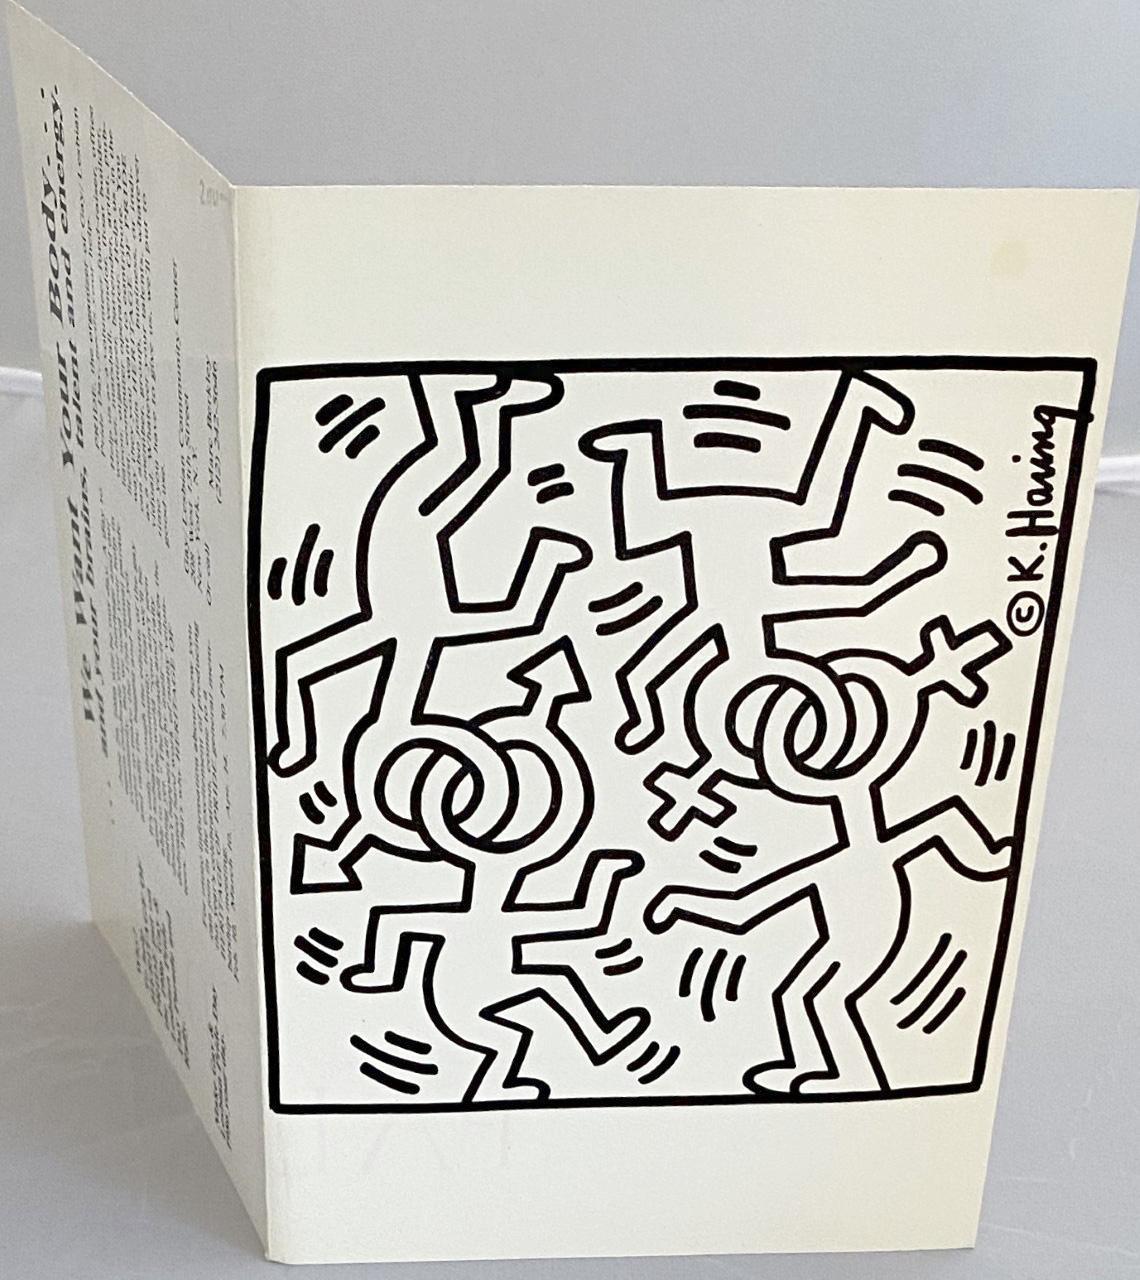 Keith Haring Gay Pride New York 1986: 
Keith Haring illustrated folding-invitation for Gay/Lesbian Pride Day at New York's Palladium nightclub, 1986. Executed during Haring’s lifetime. Rare & highly collectible.

Offset printed single-fold poster